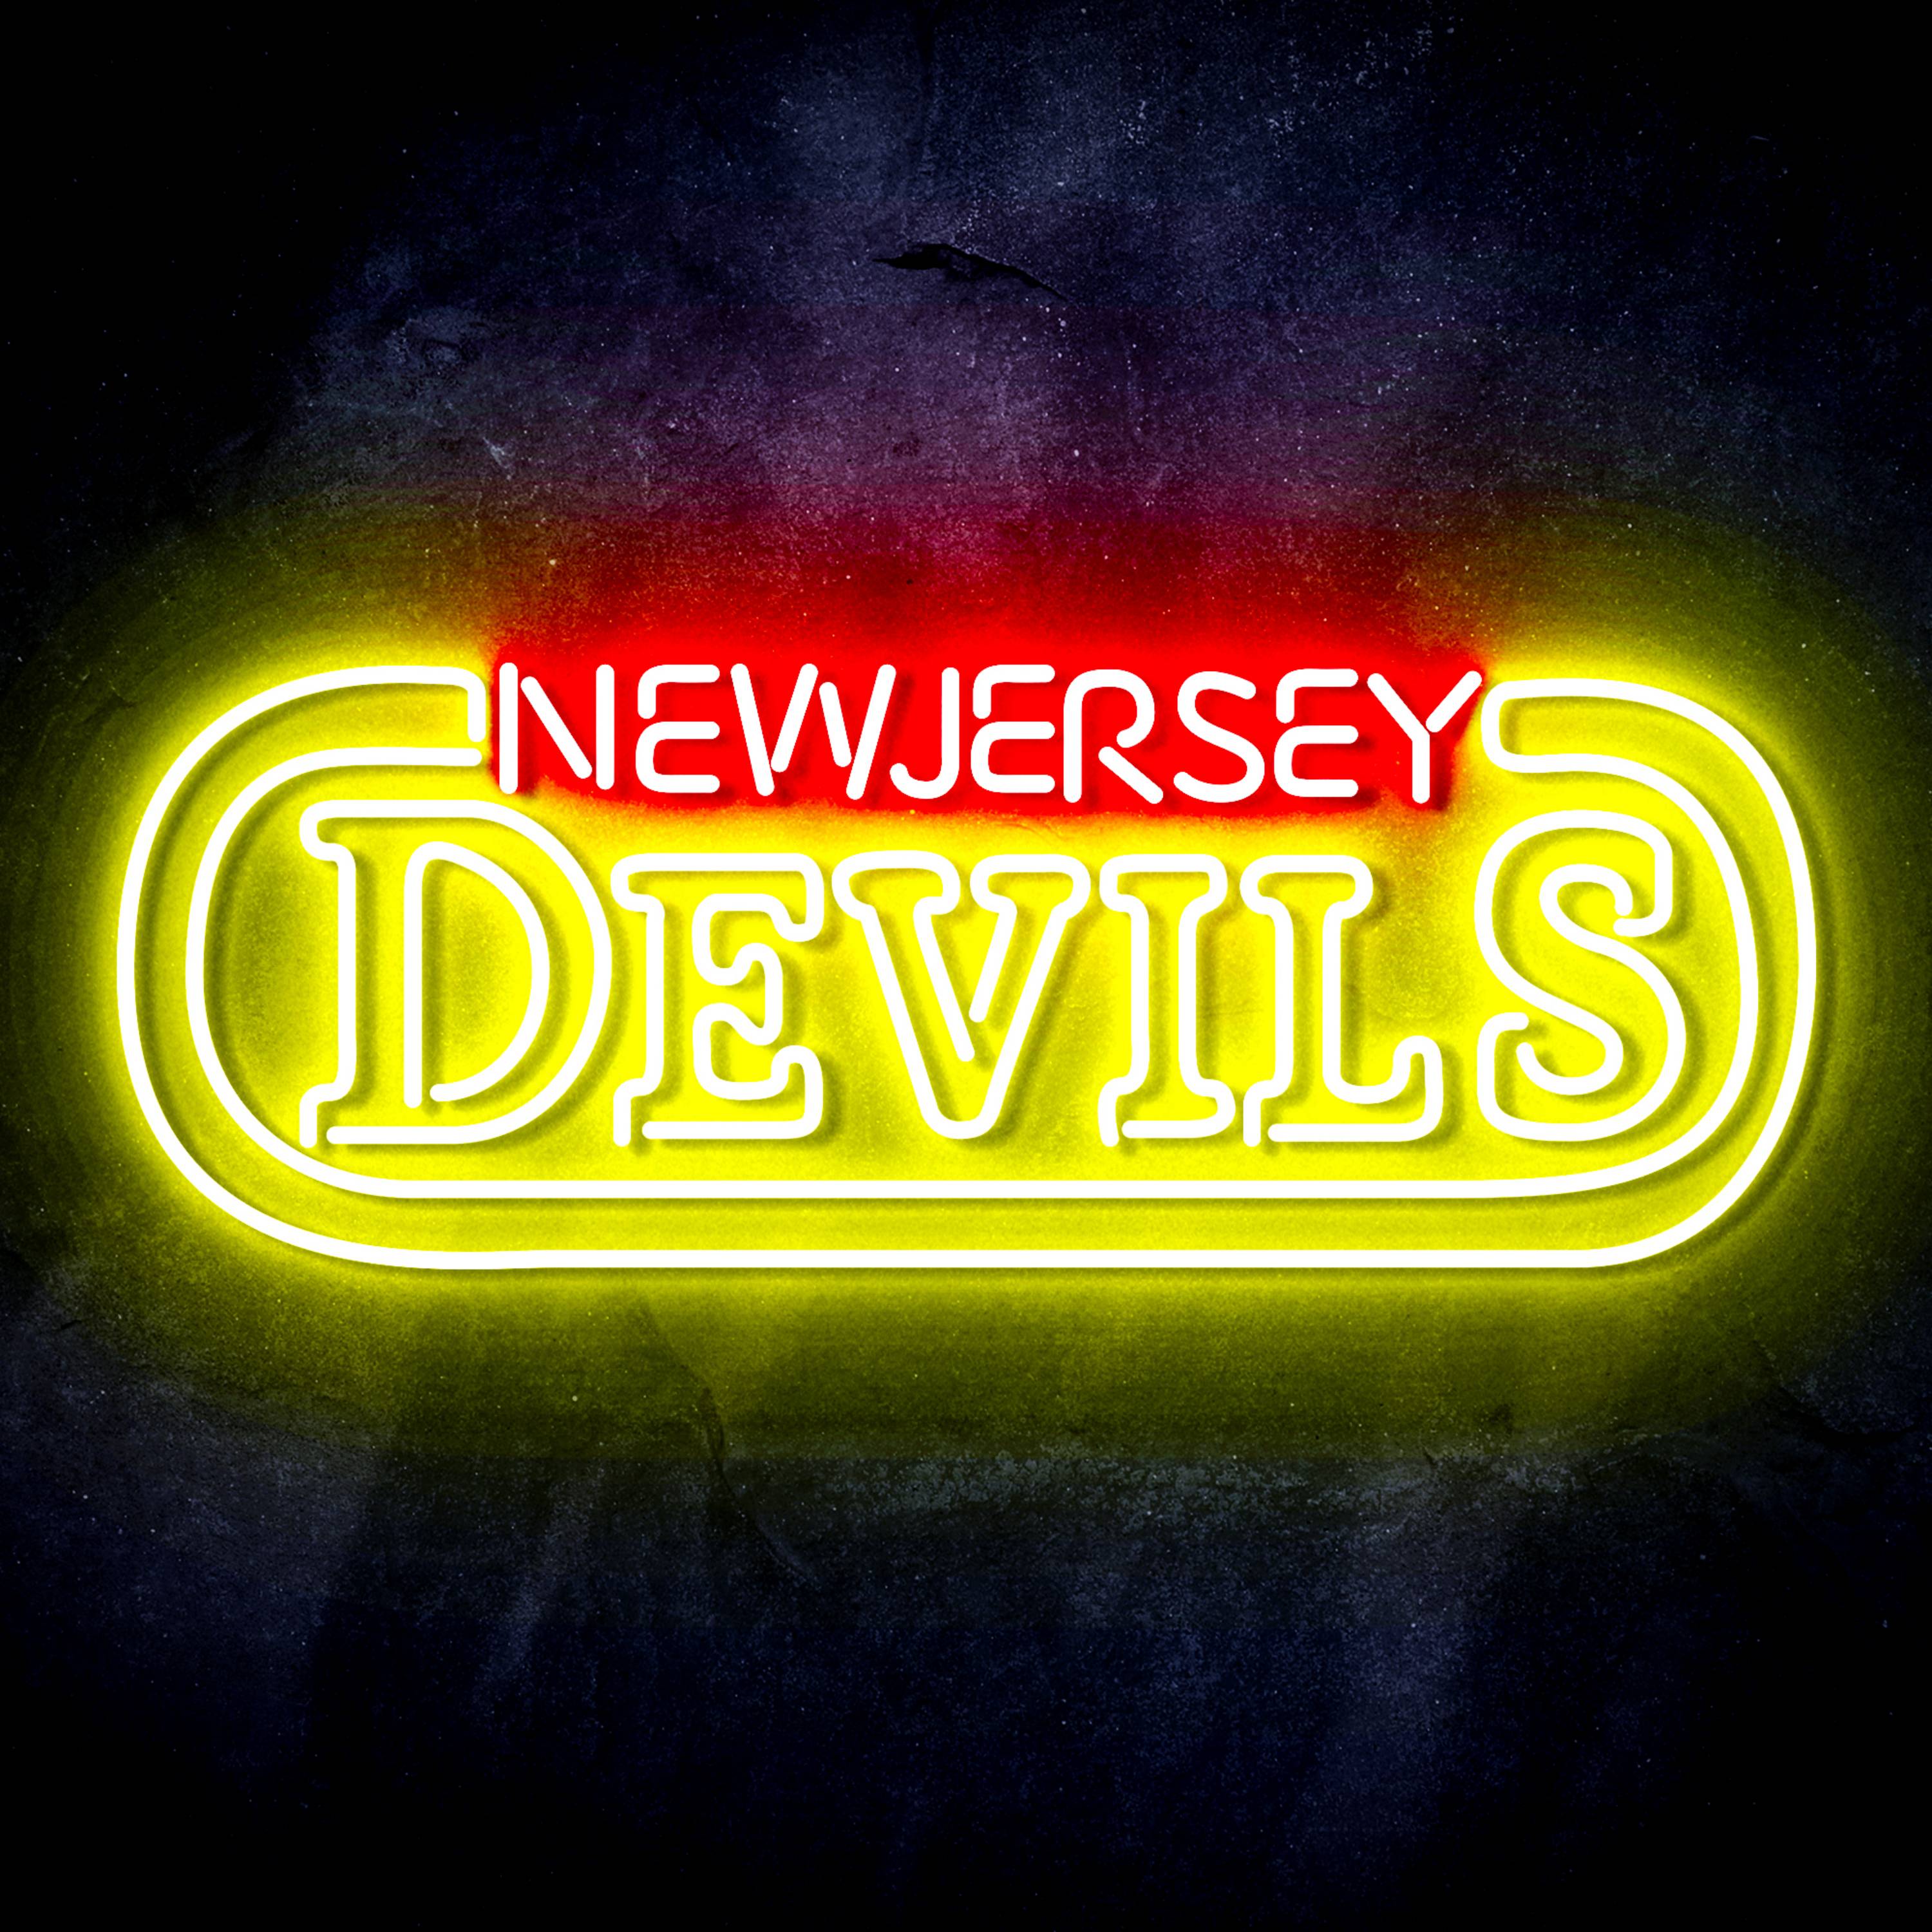 NHL New Jersey Devils LED Neon Sign